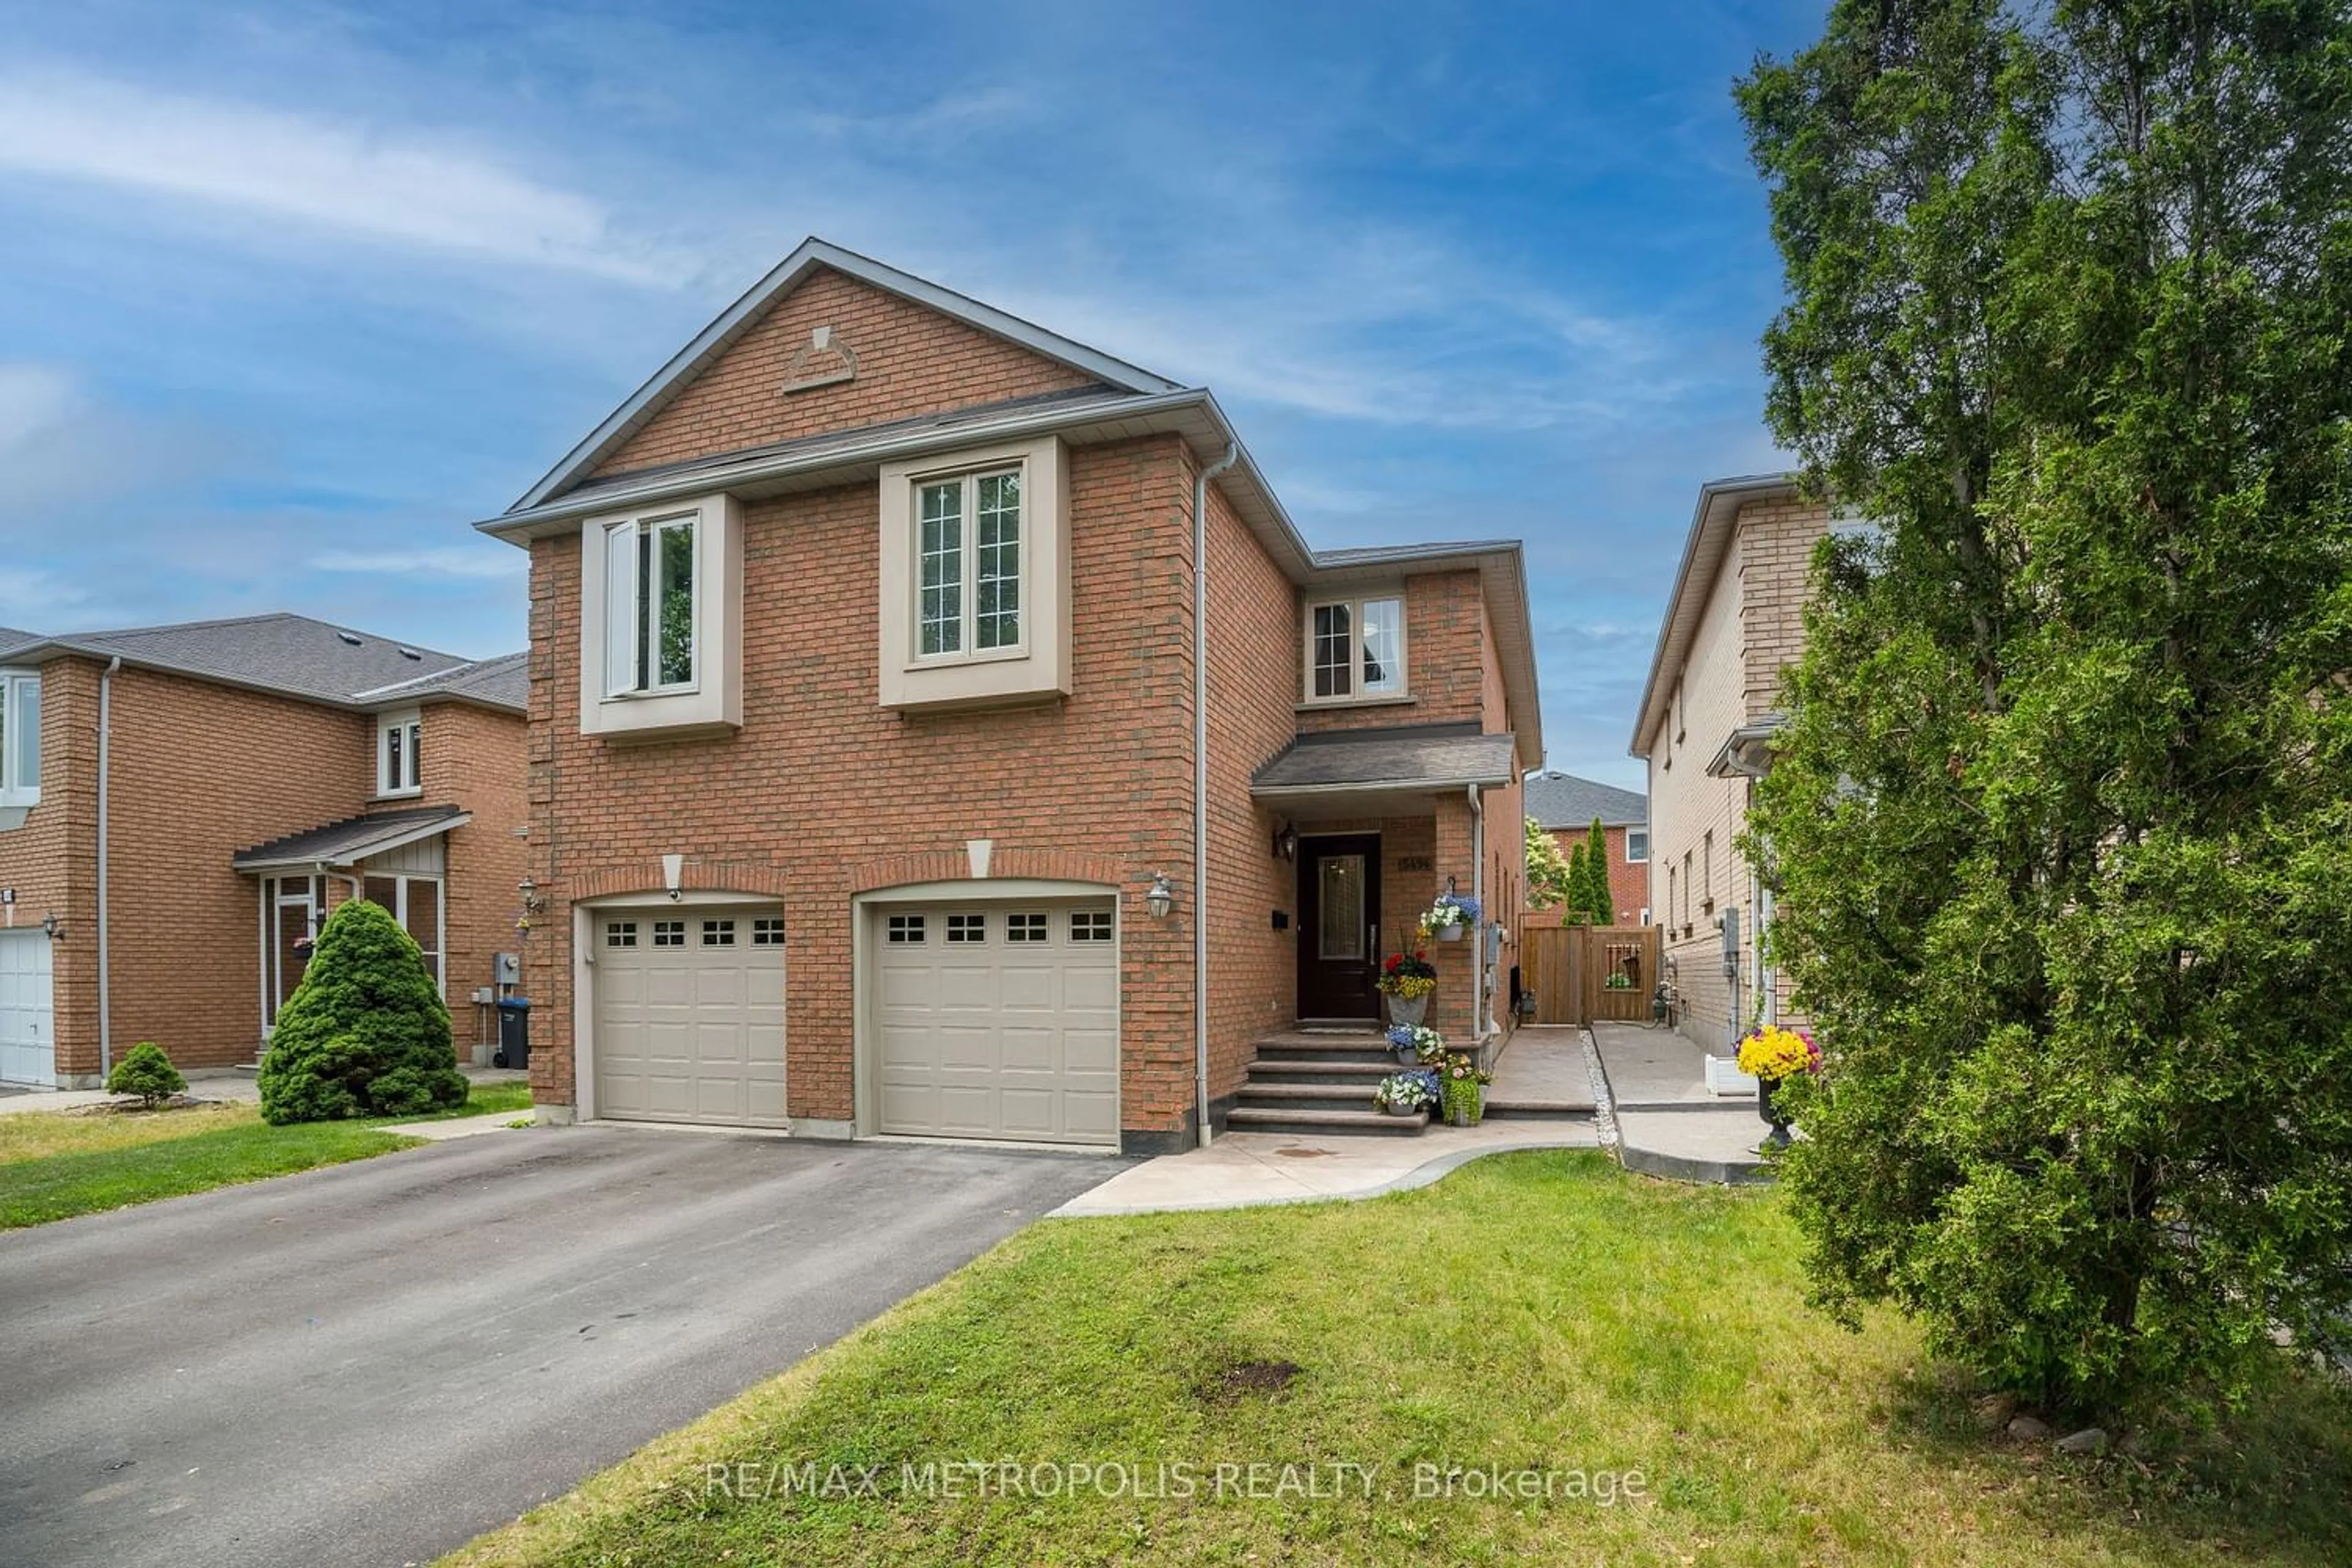 Home with brick exterior material for 5494 Cosmic Cres, Mississauga Ontario L4Z 3R8